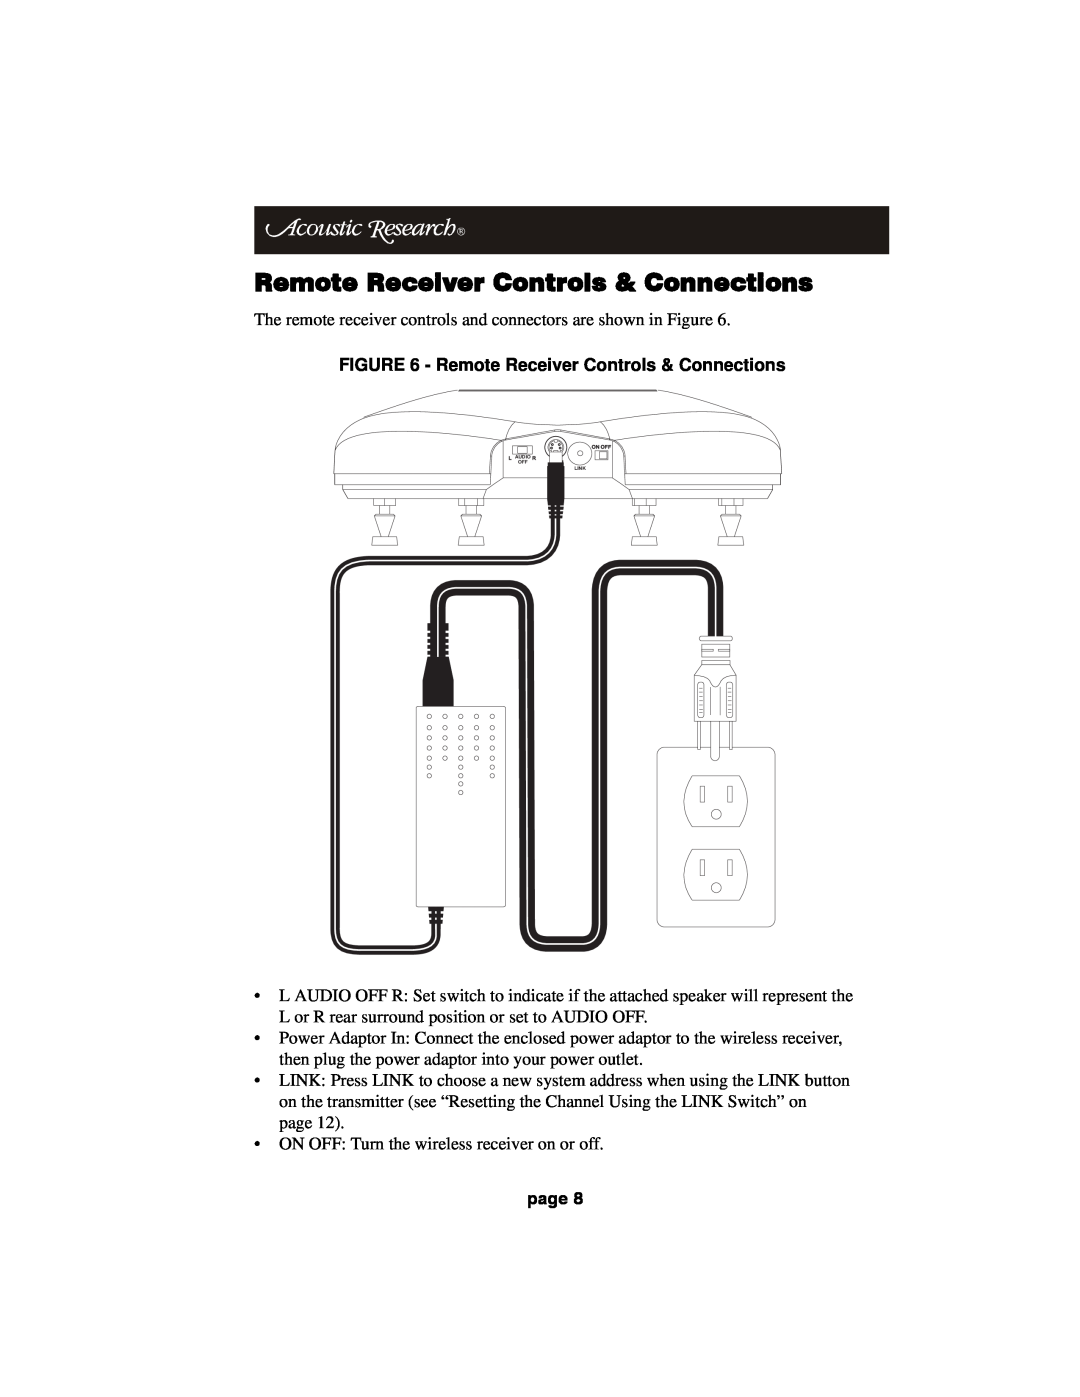 Acoustic Research HT60 operation manual Remote Receiver Controls & Connections, page 